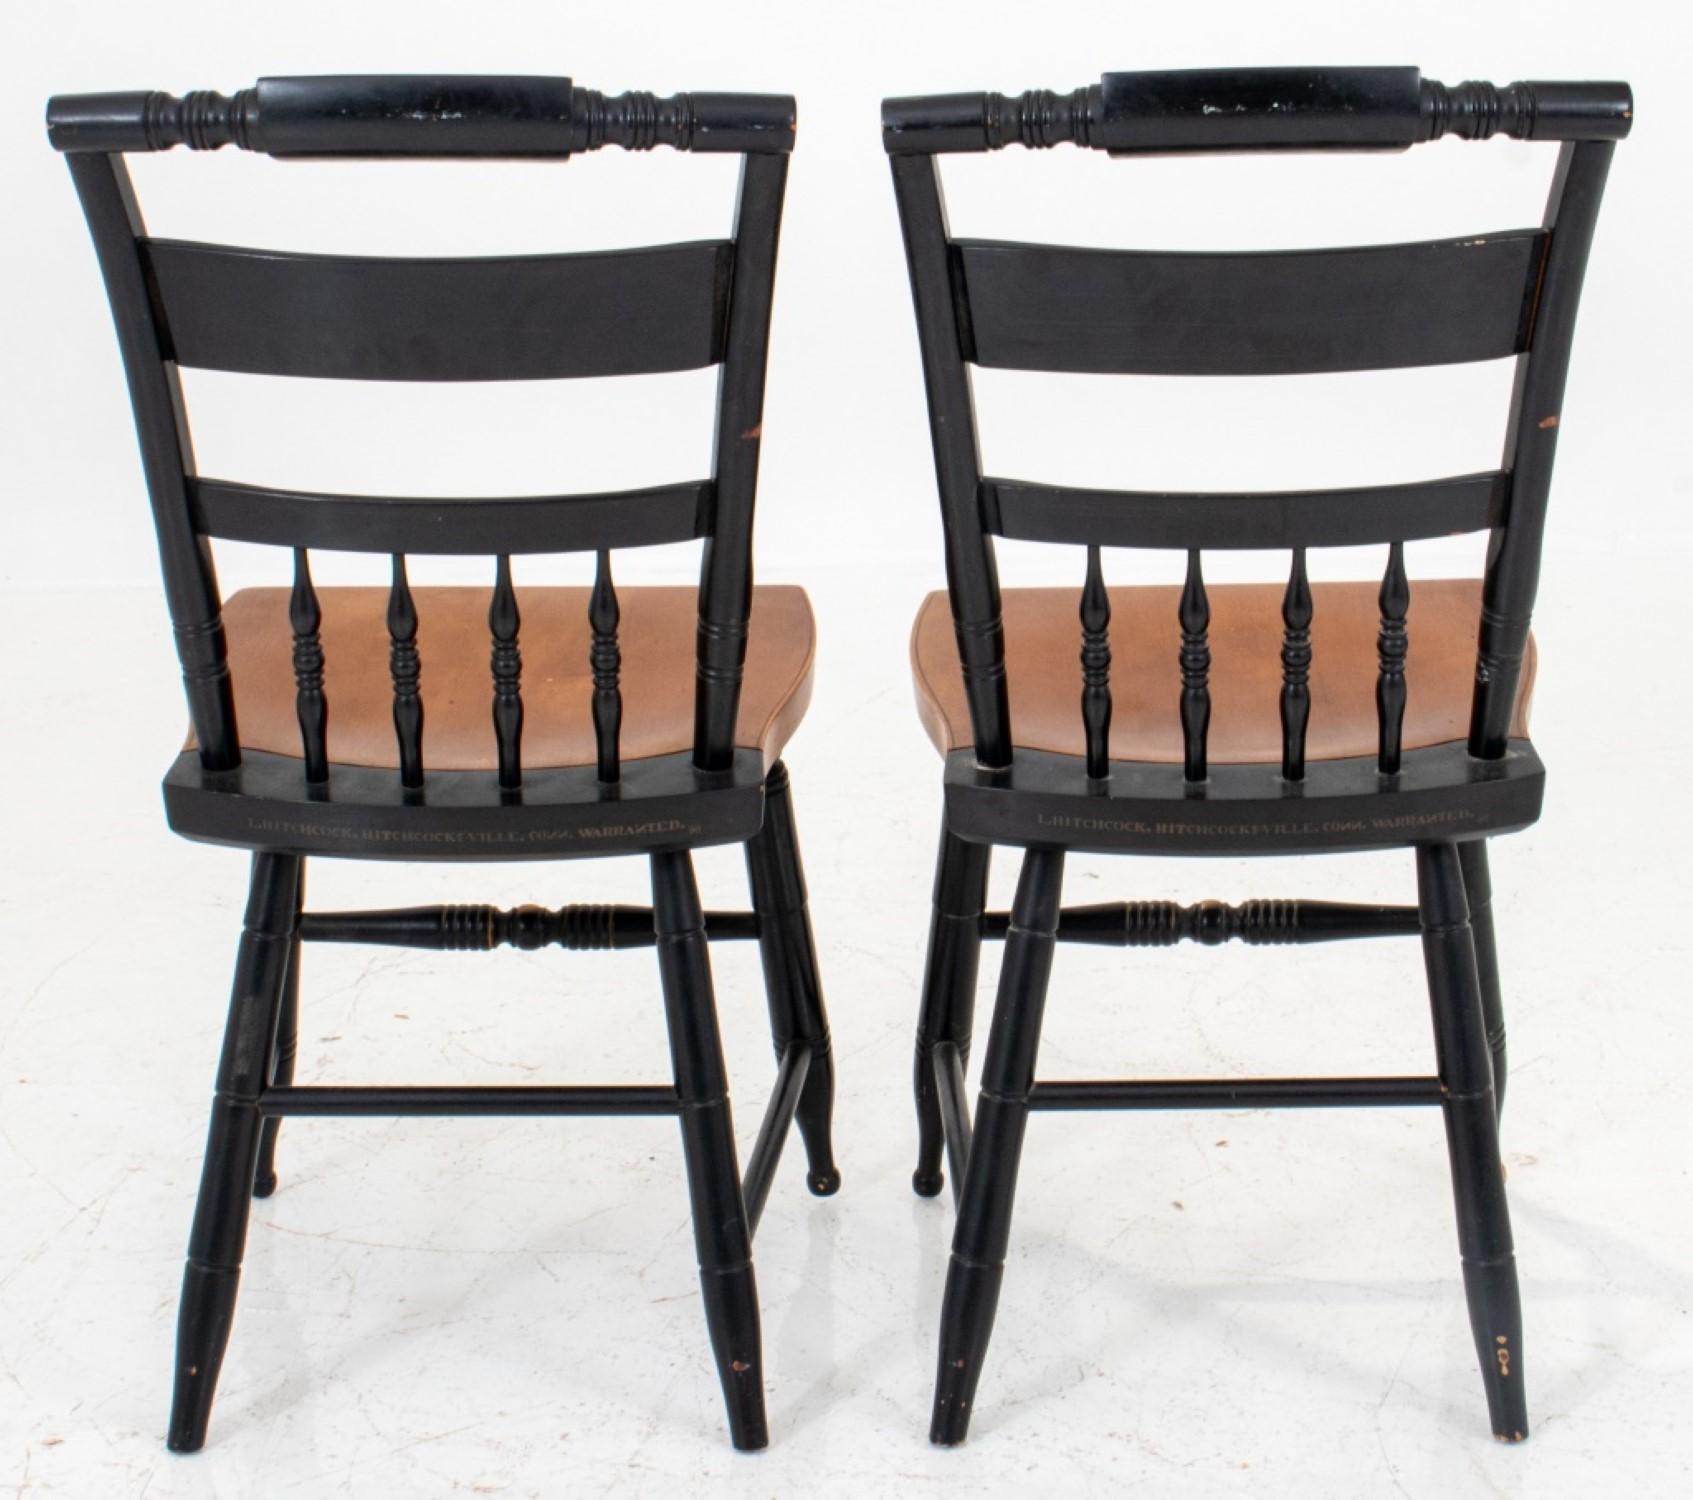 American Folk style gold-stenciled ebonized wood side chairs in the Hitchcock manner, with floral stenciled decoration.

33.5 inches in height, 16 inches in width, 15.5 inches in depth, with an 18-inch seat.